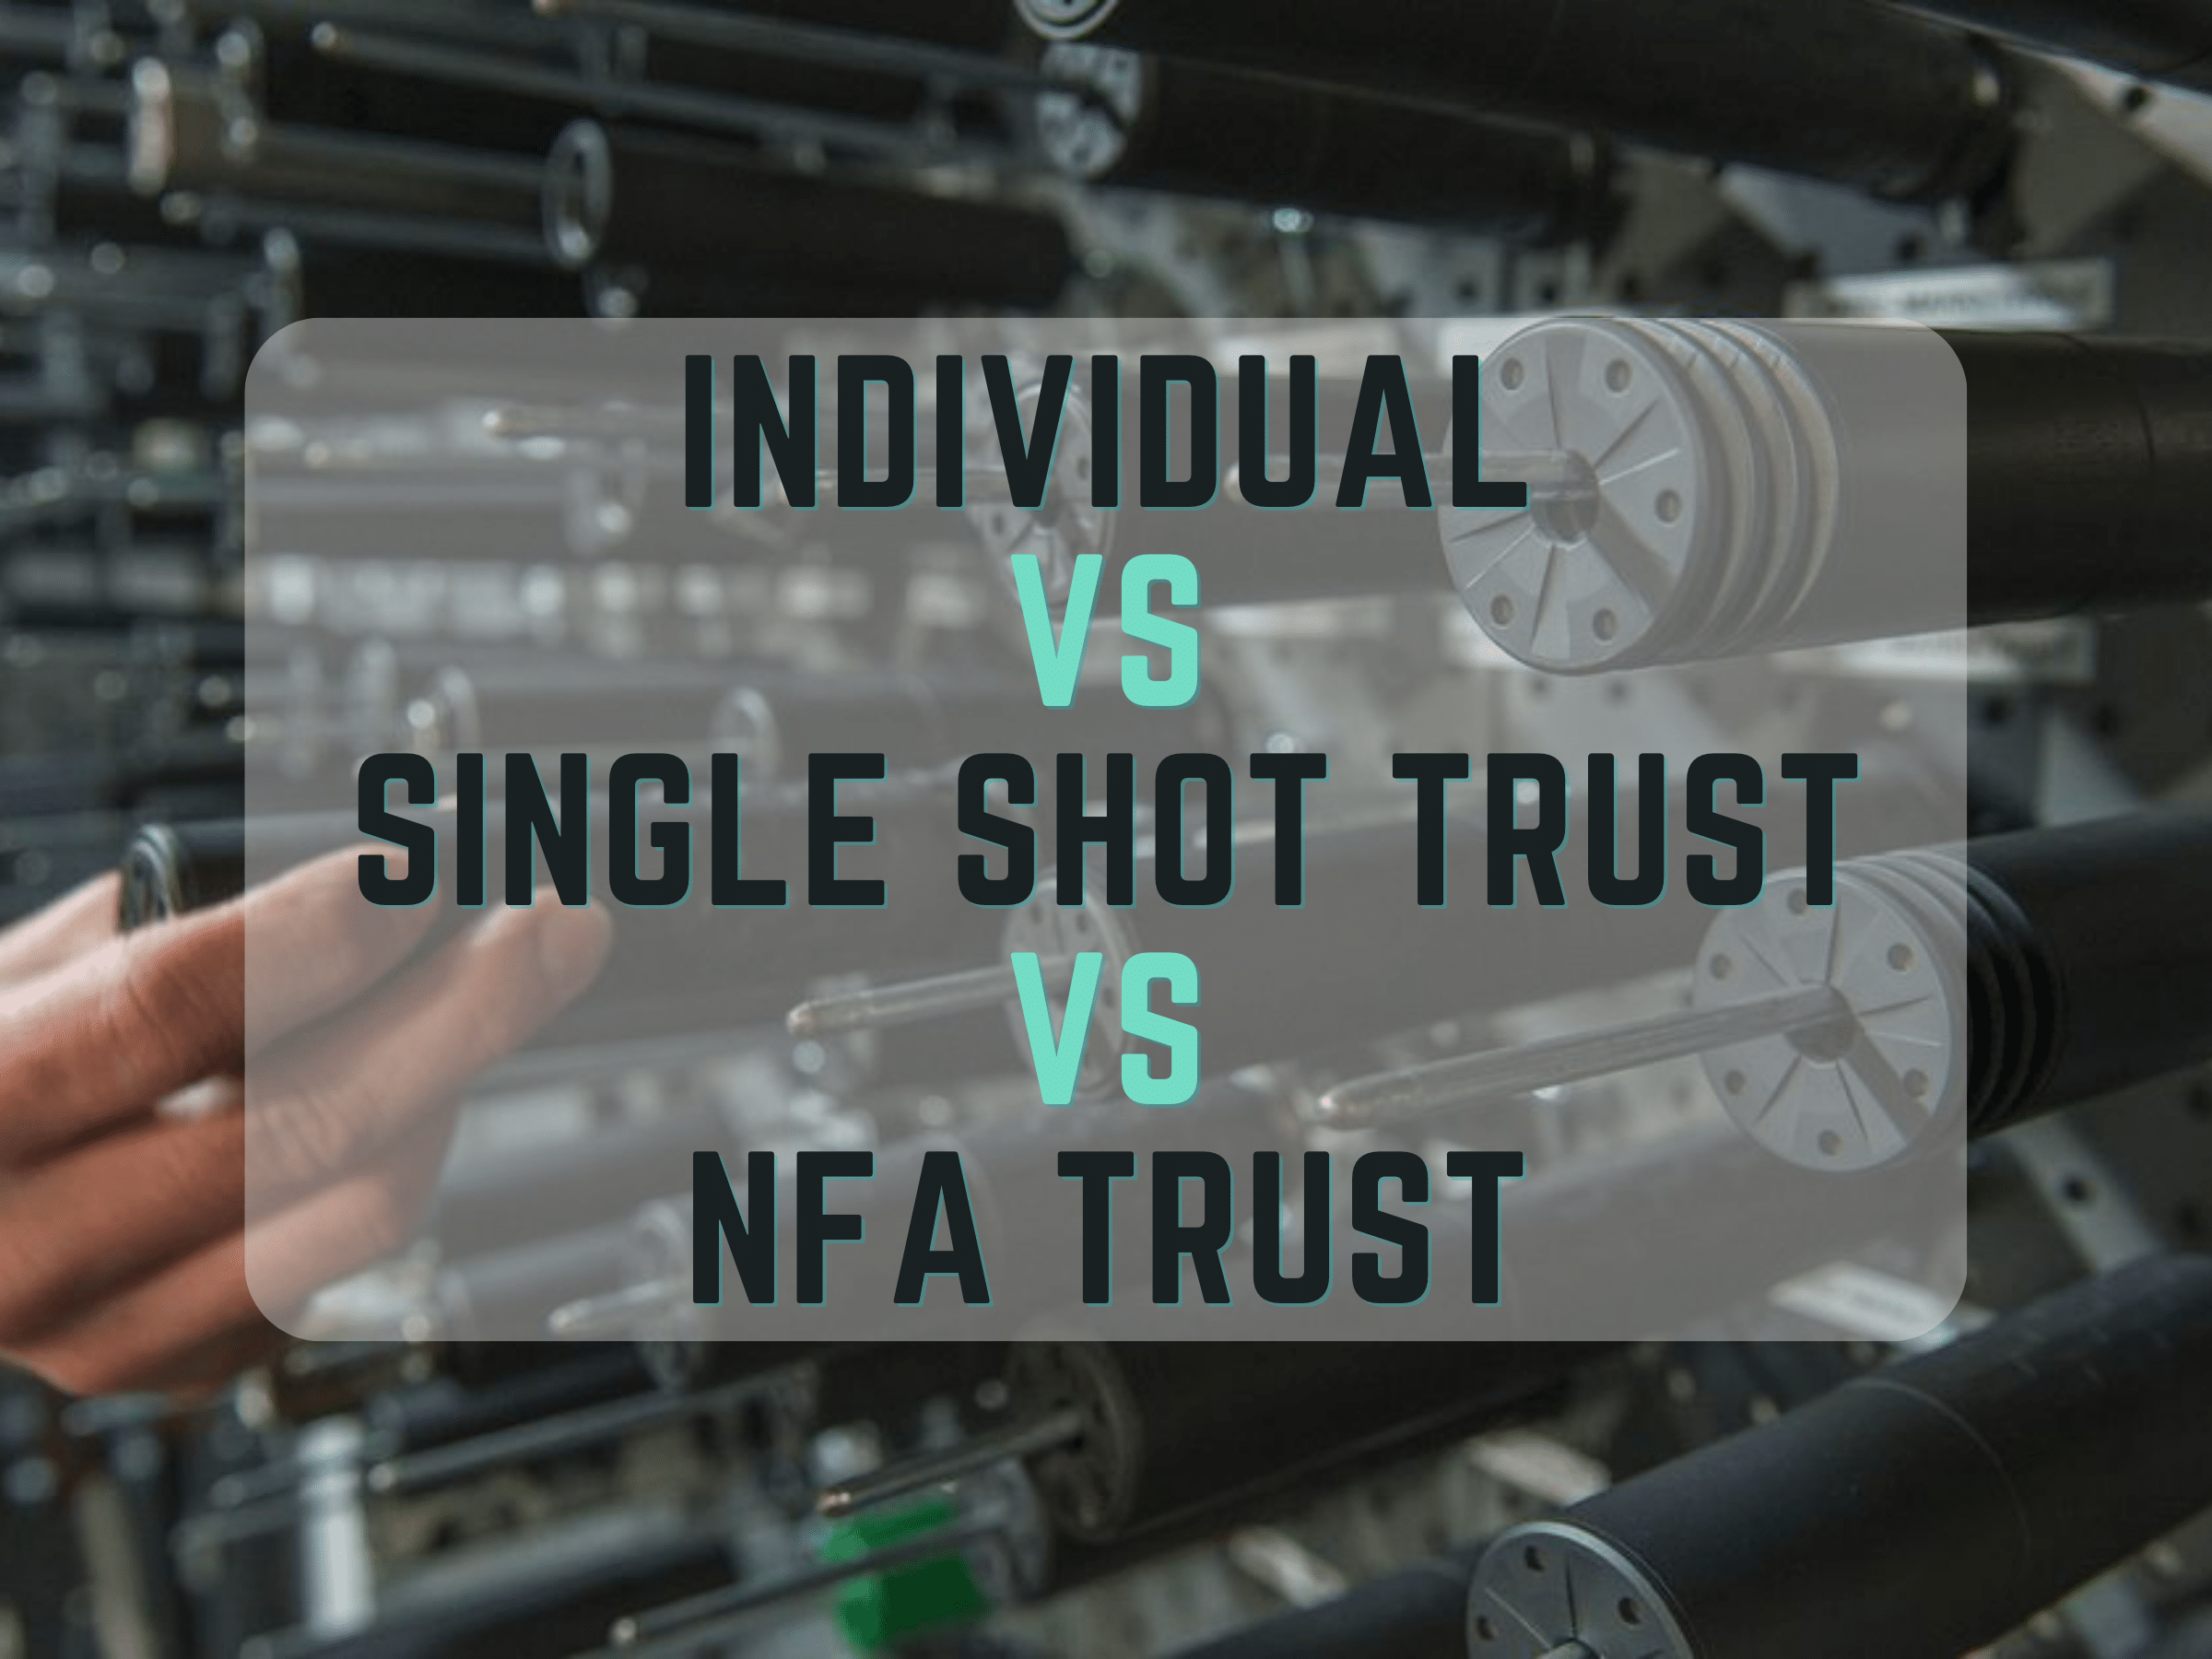 Here's an explanation on the difference in filing types for an NFA Trust